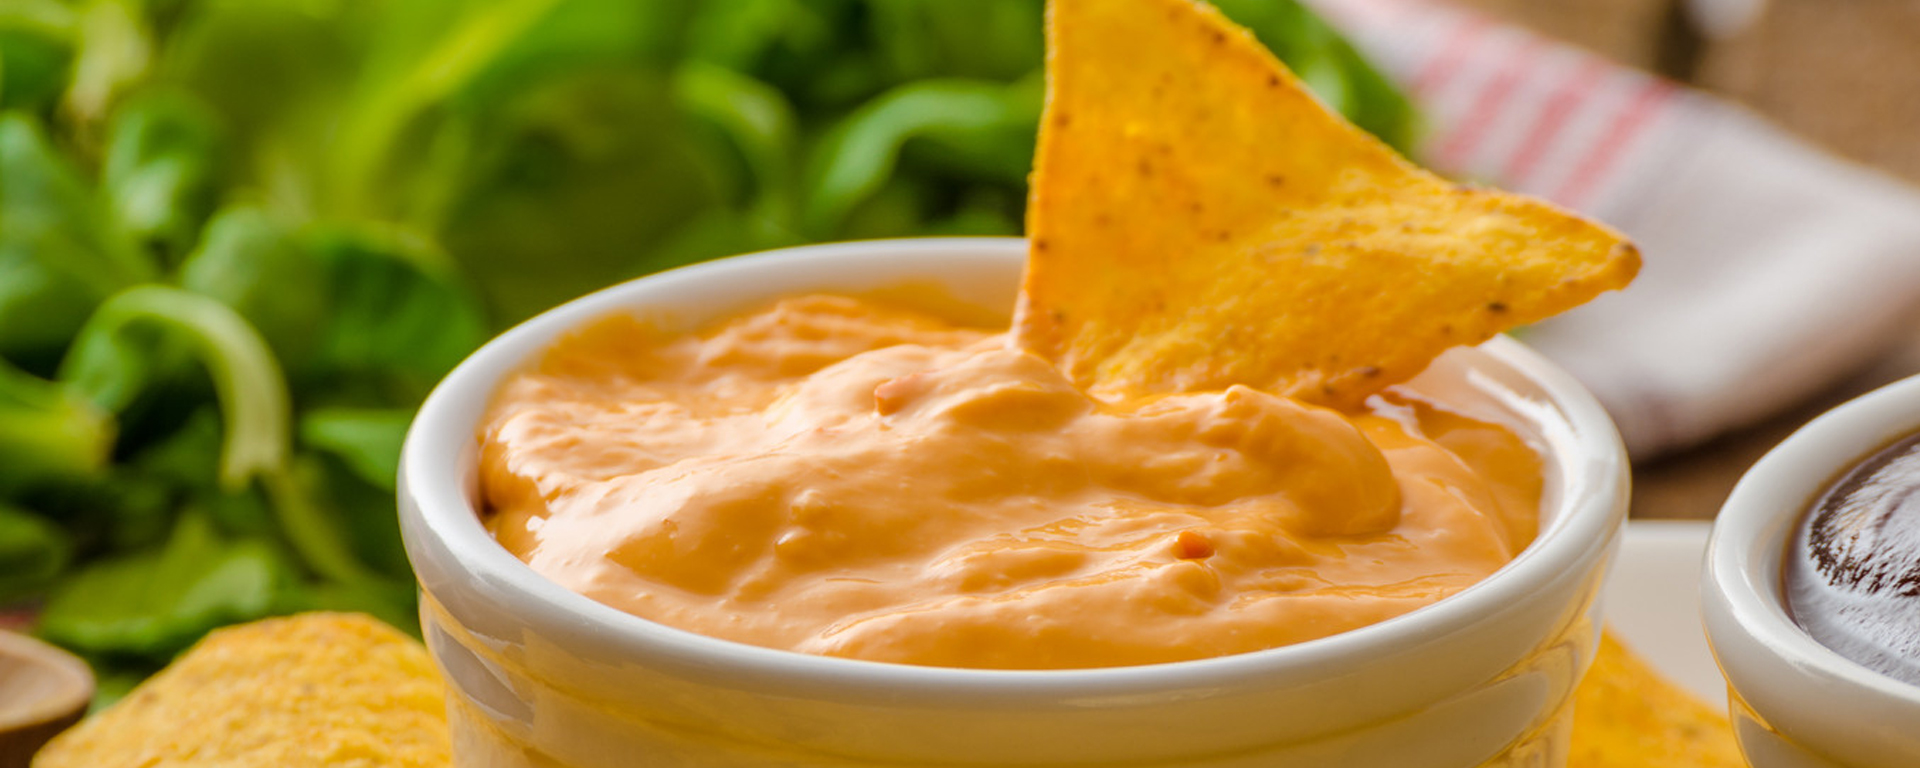 Photo of - Cheddar Cheese Dip